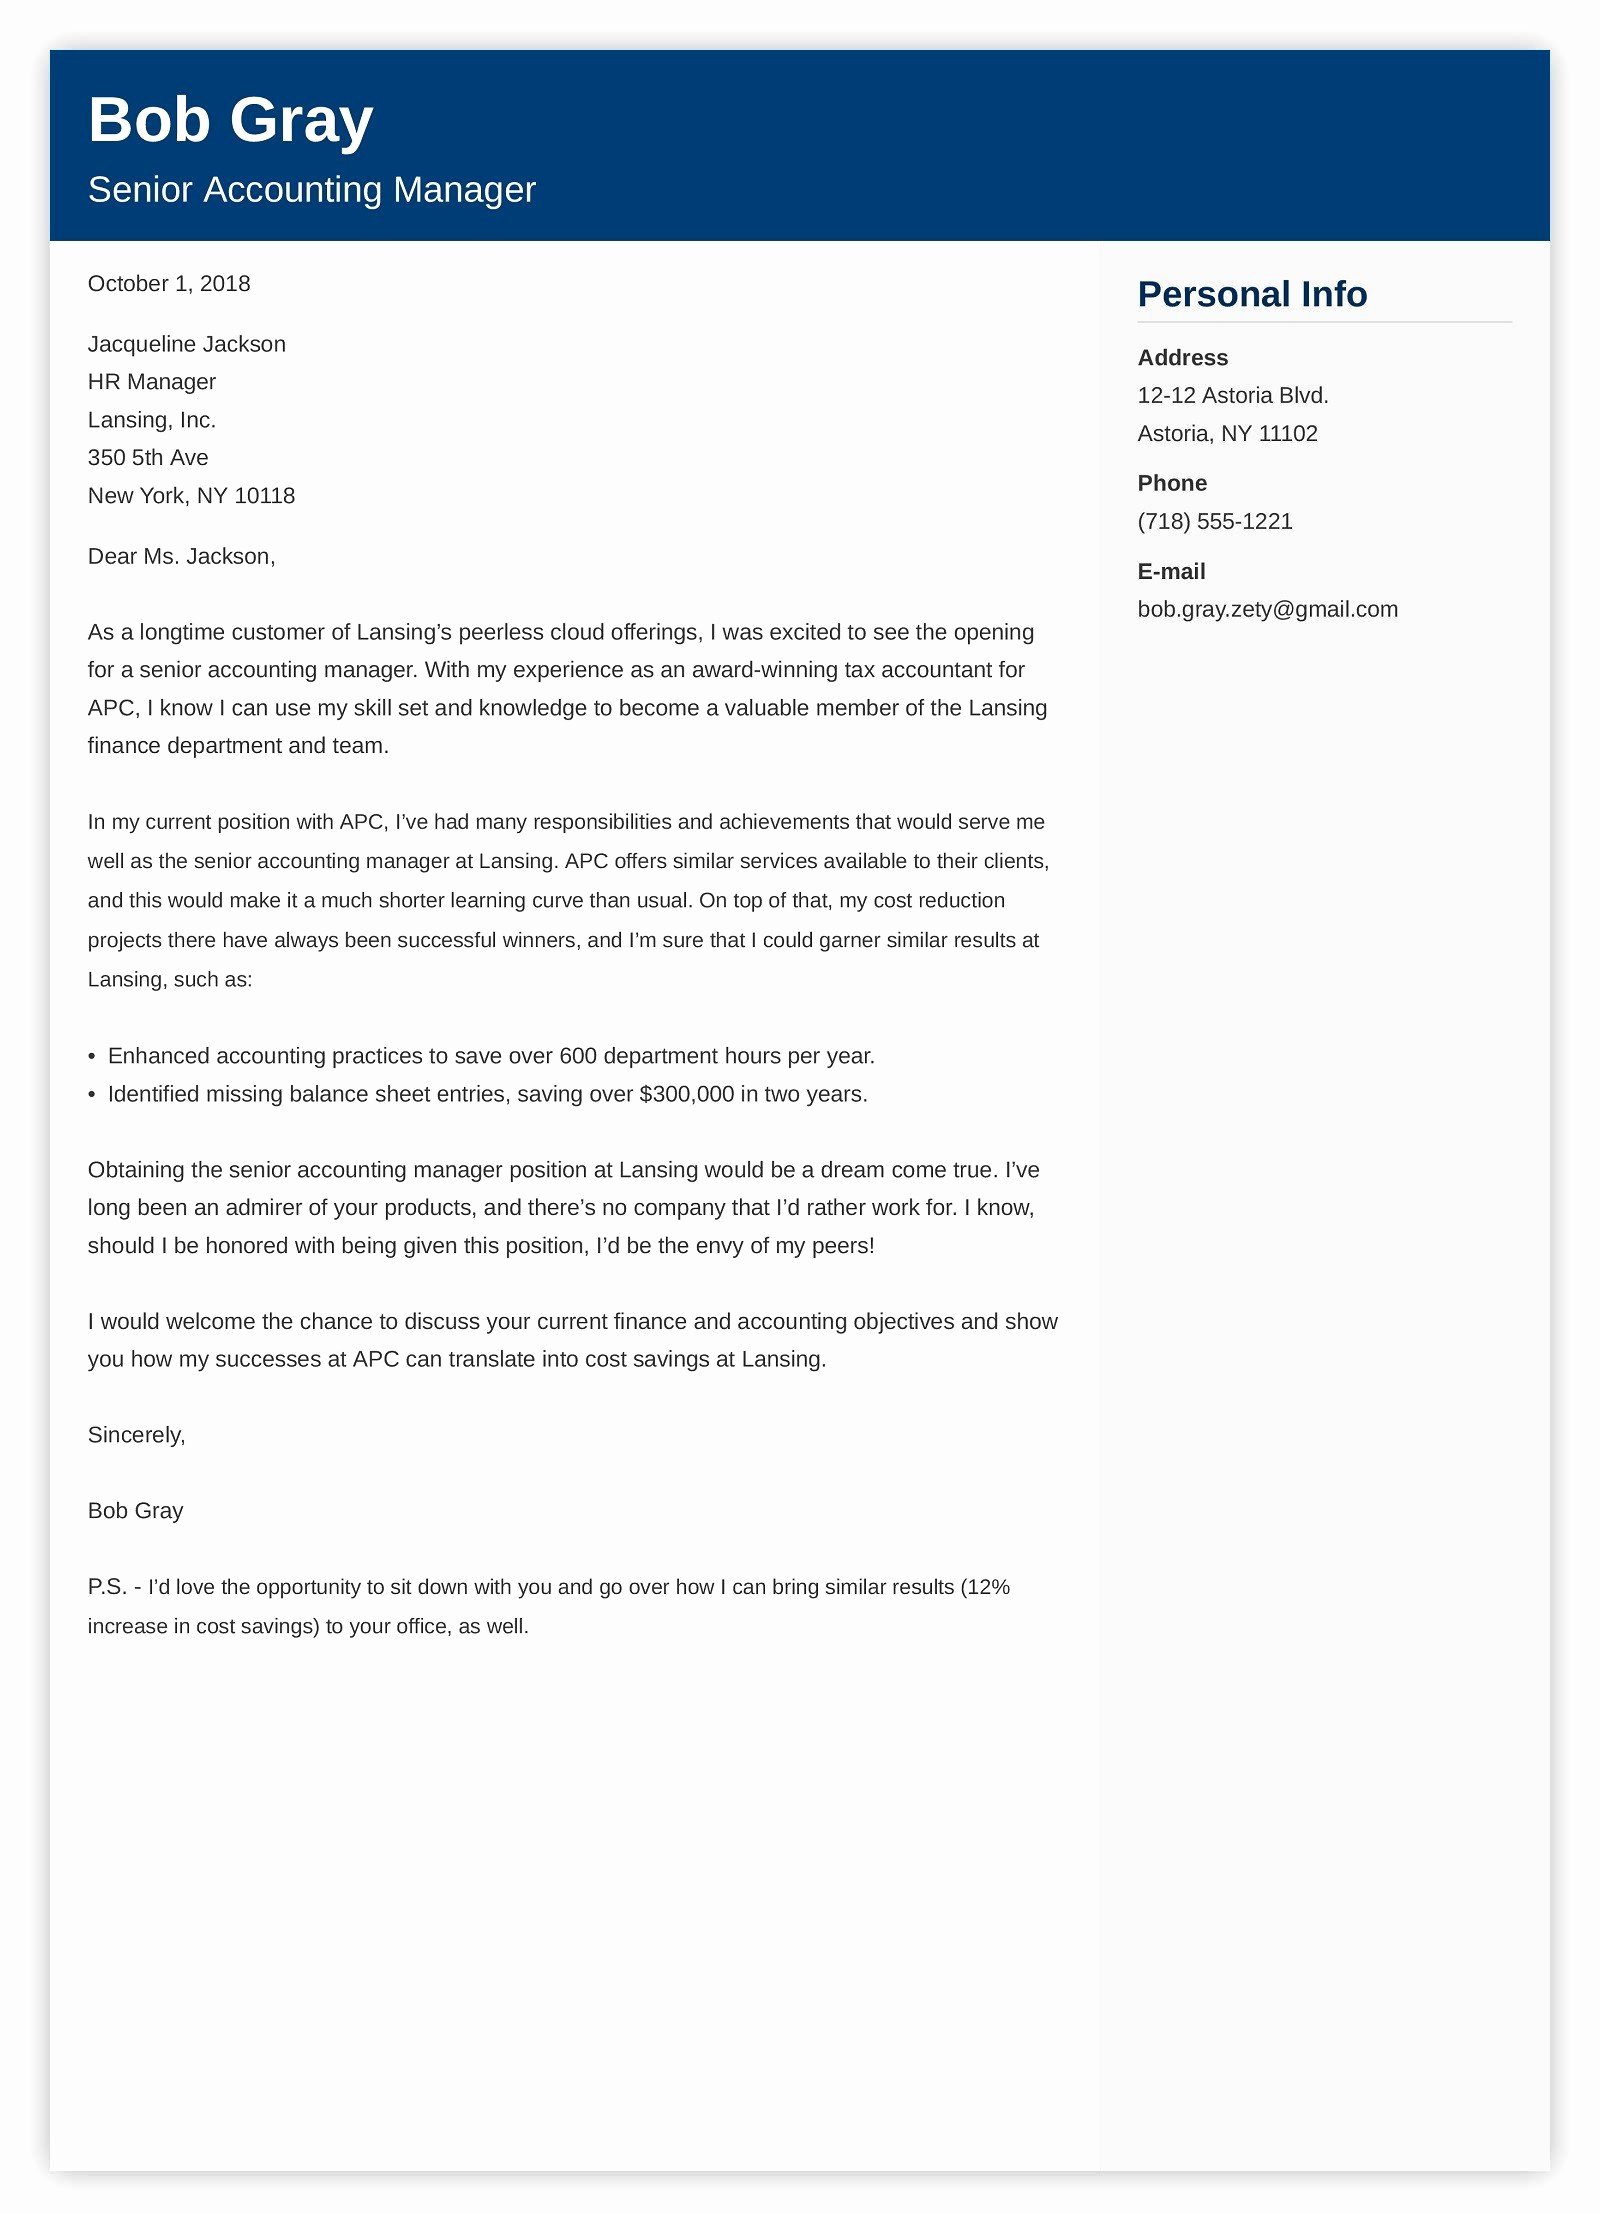 Accounting Job Cover Letter Unique Accounting Cover Letter Sample &amp; Plete Guide [20